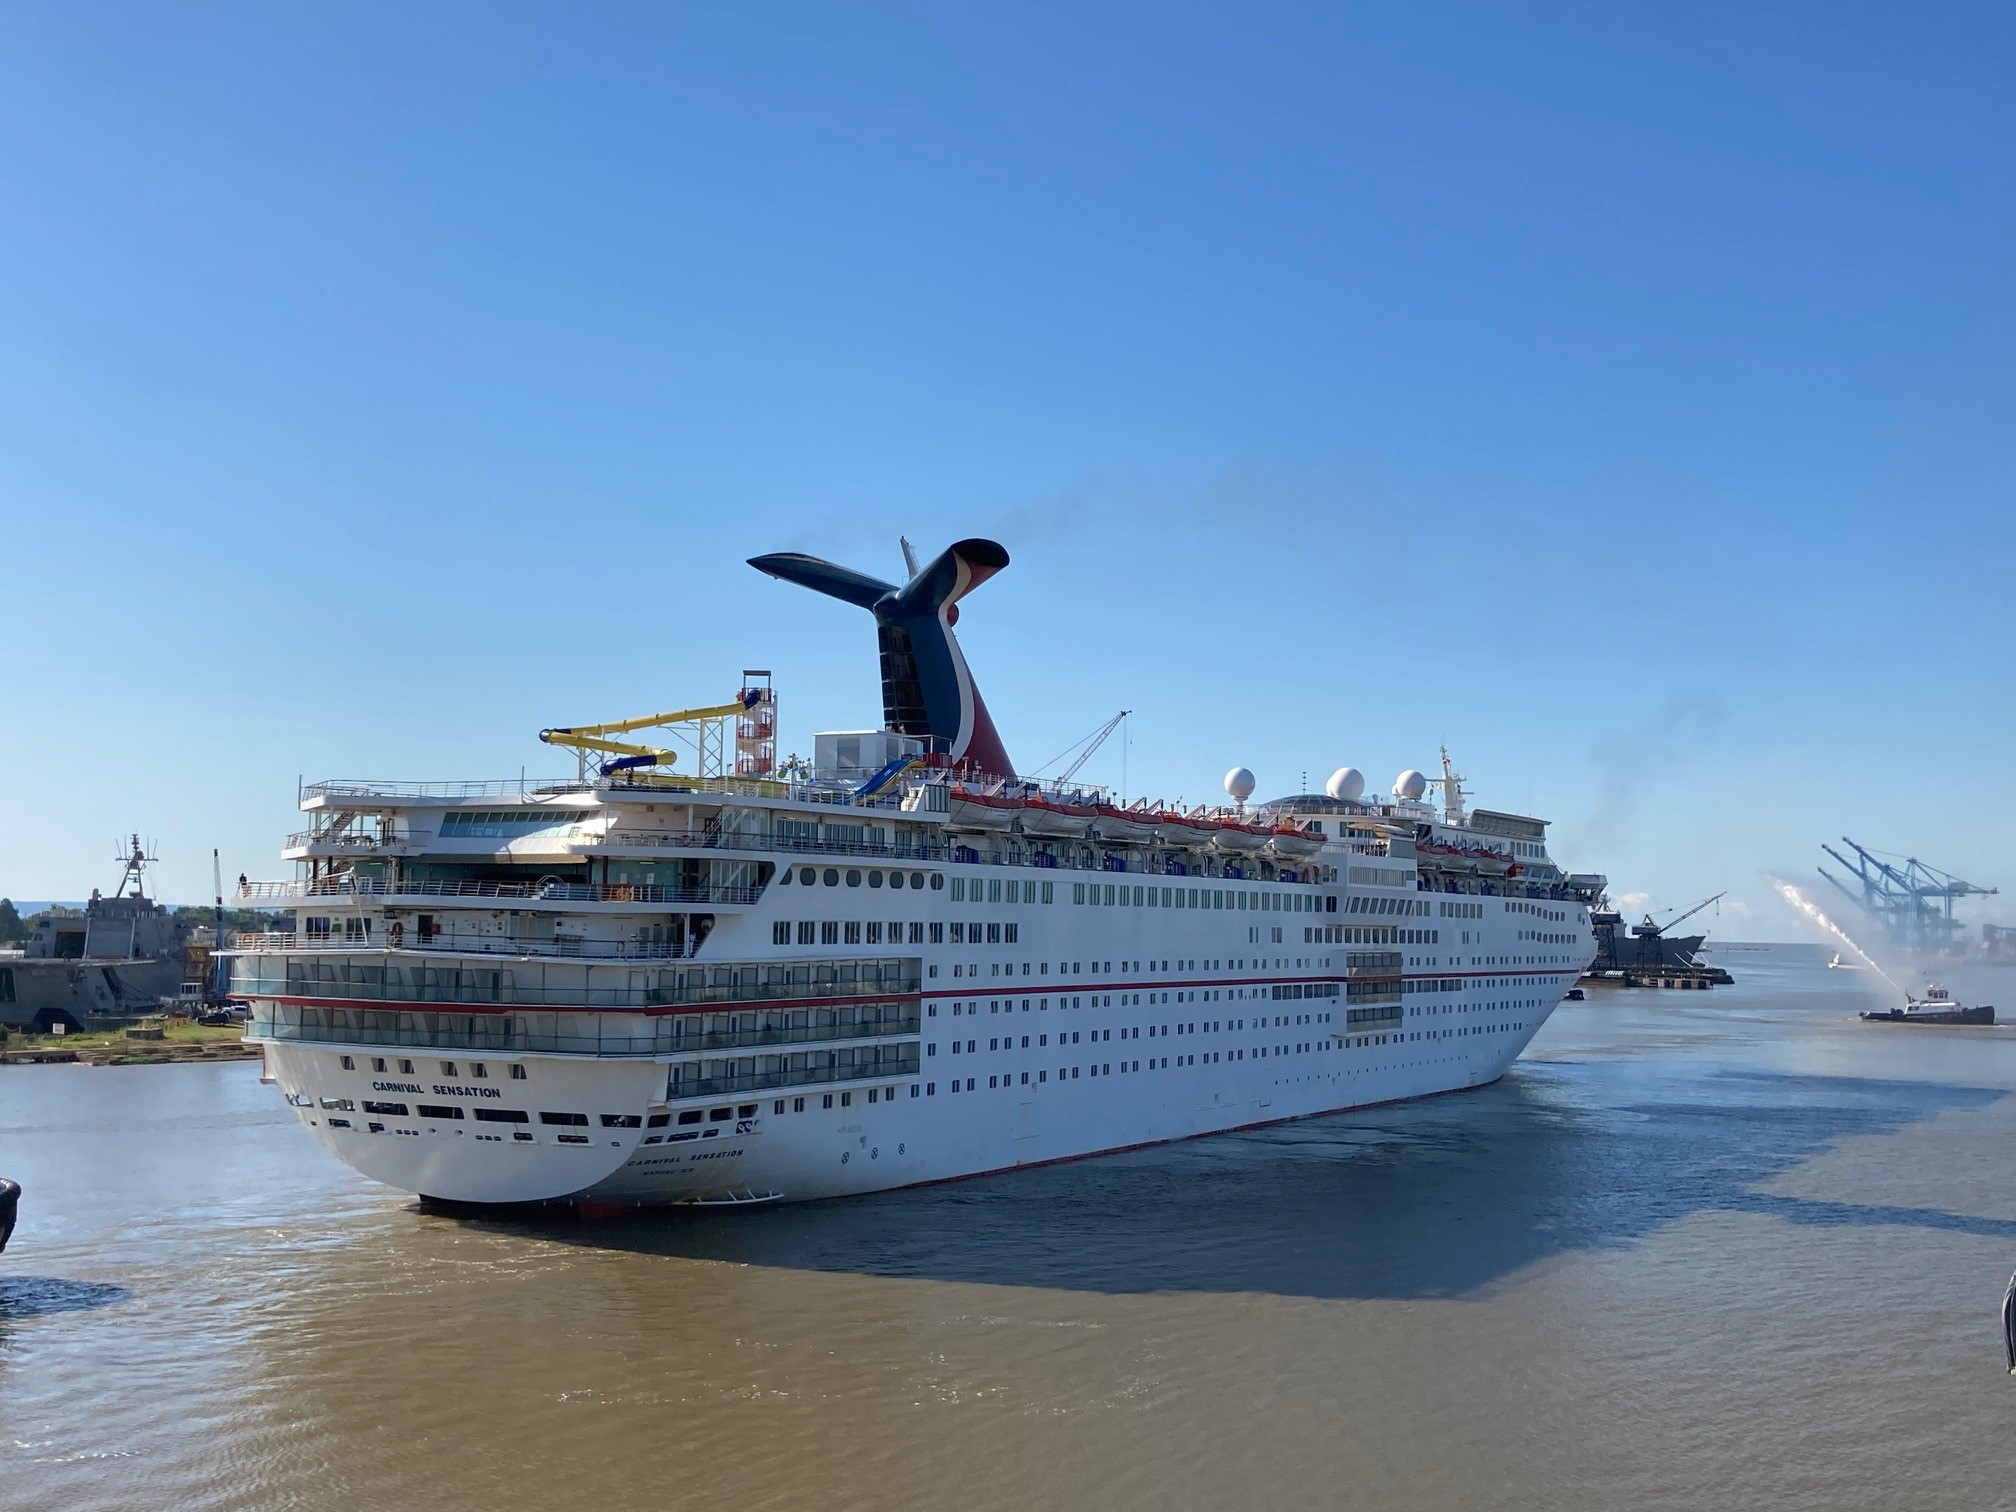 Mobile Al Cruise Schedule 2022 Carnival Delays Cruising Out Of Mobile Until January - Al.com